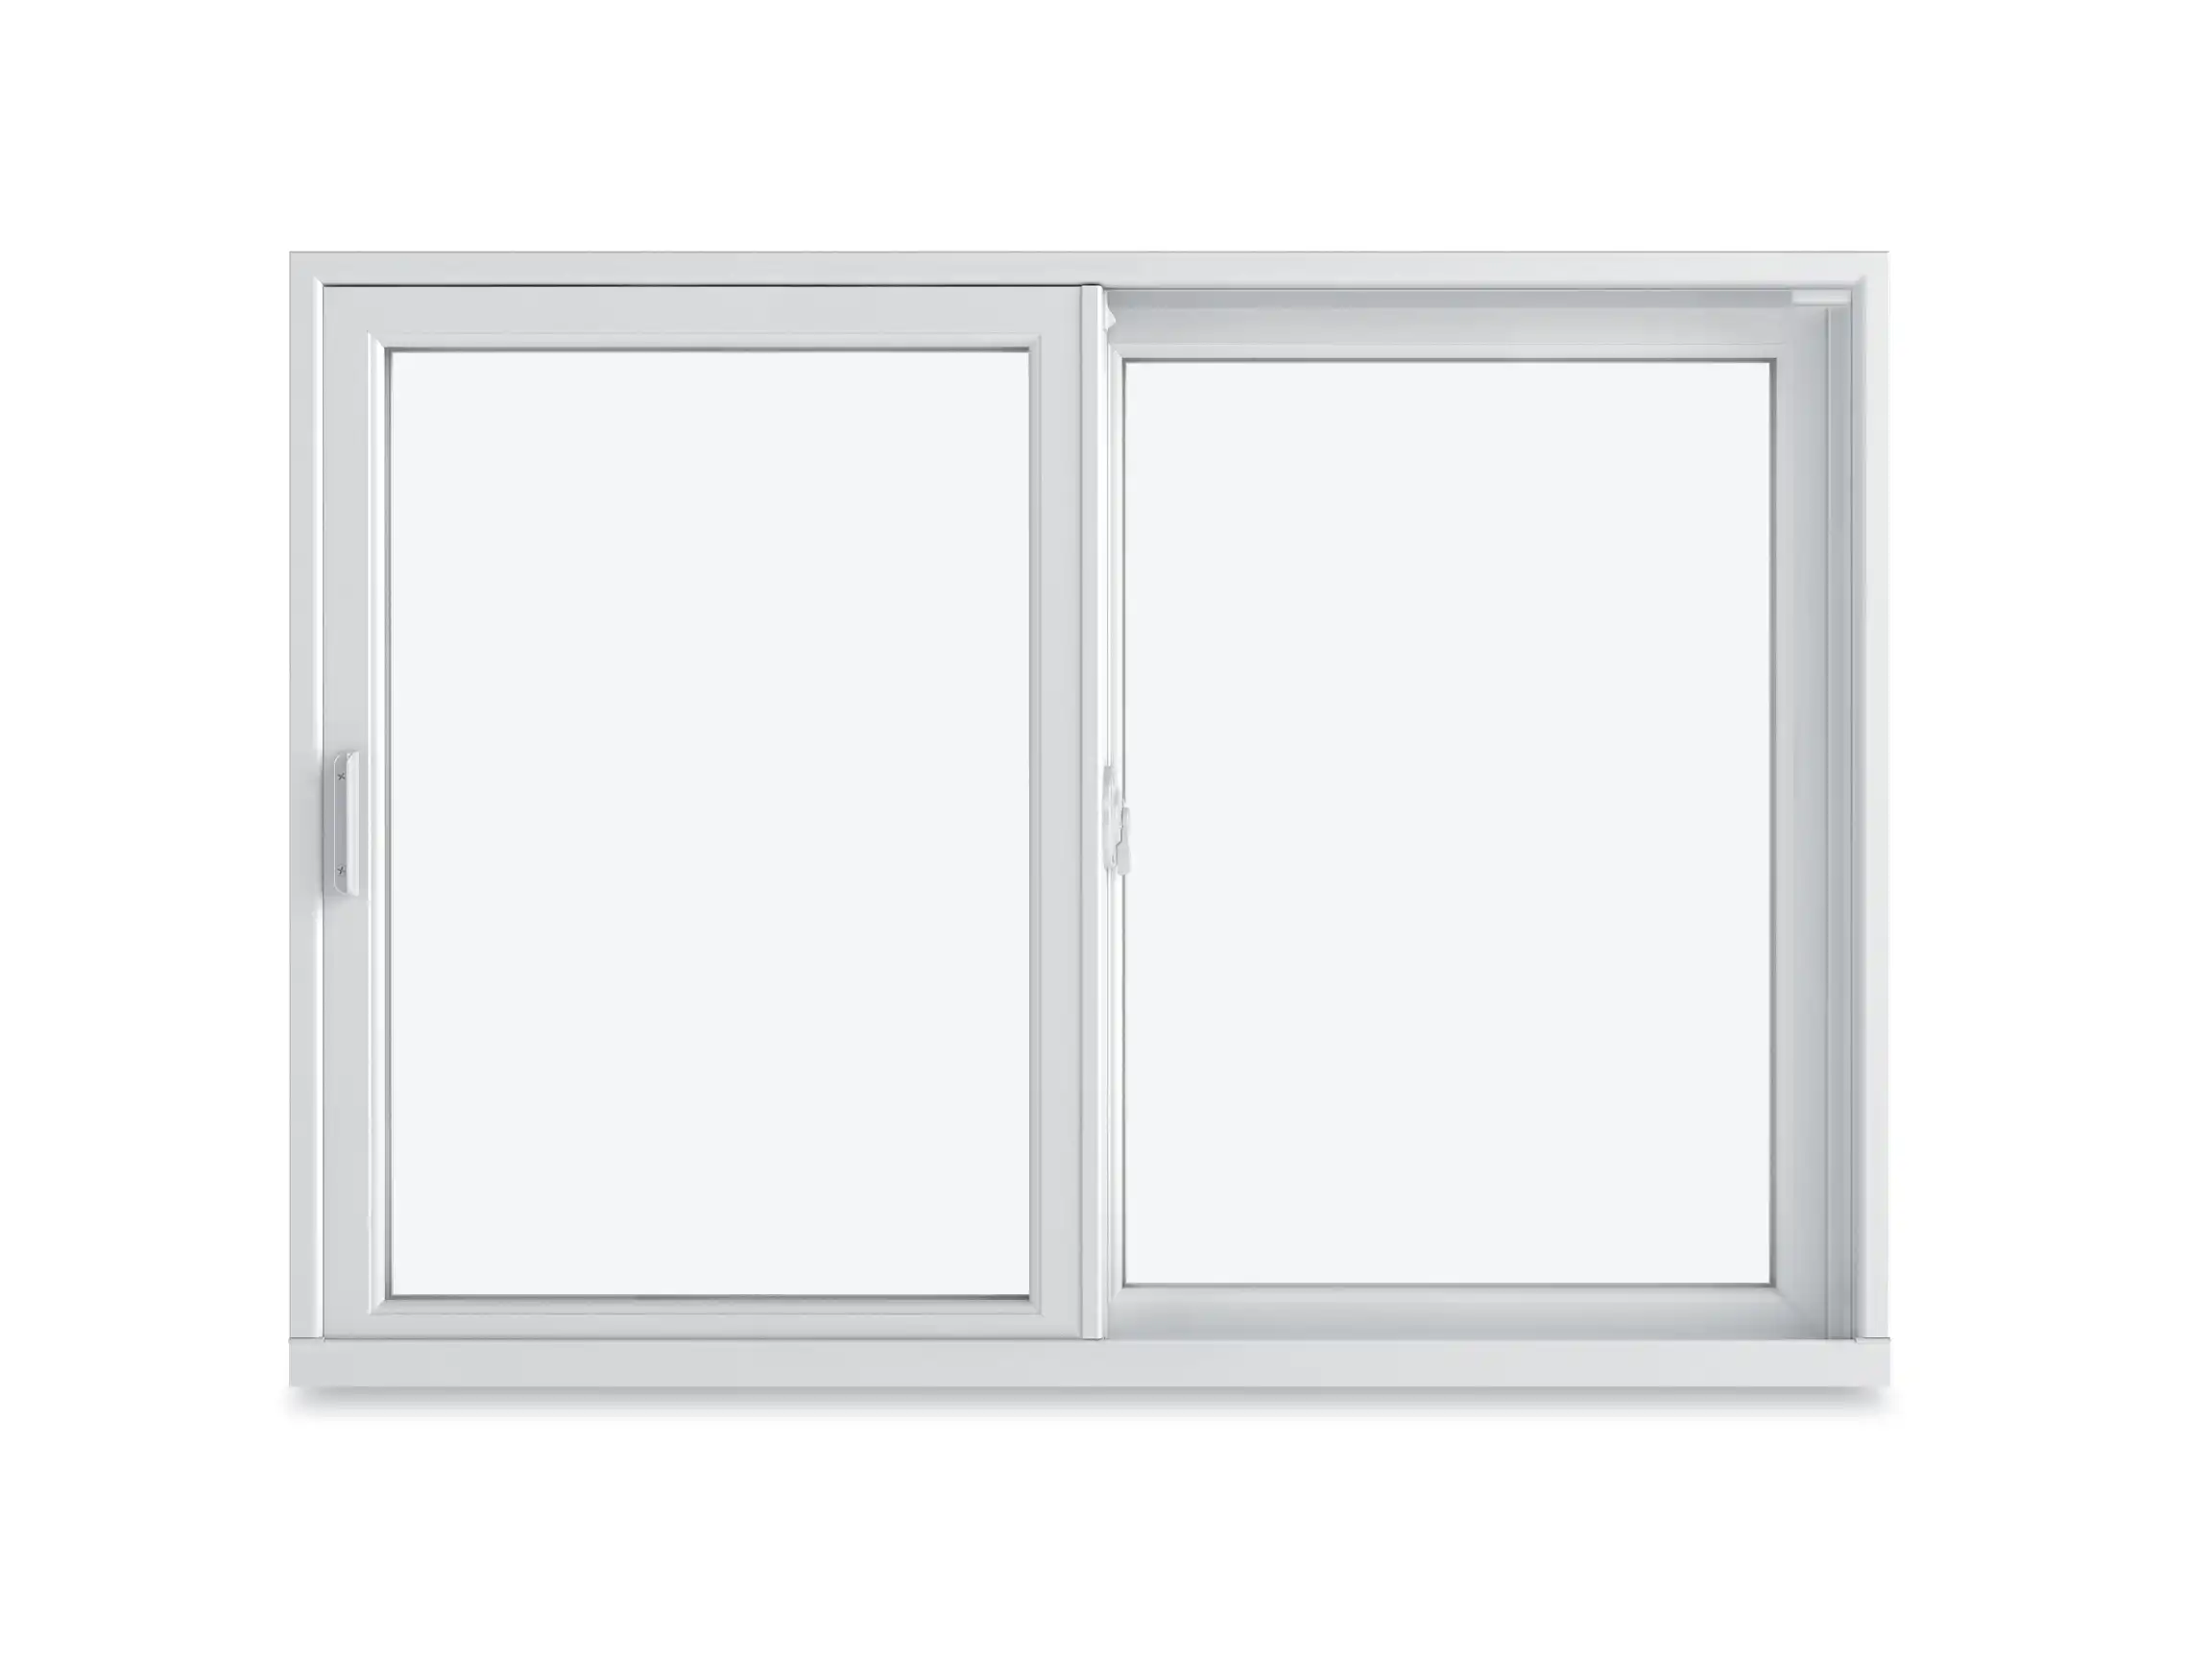 Image of a white Marvin Replacement Slider window with equal sized sash.